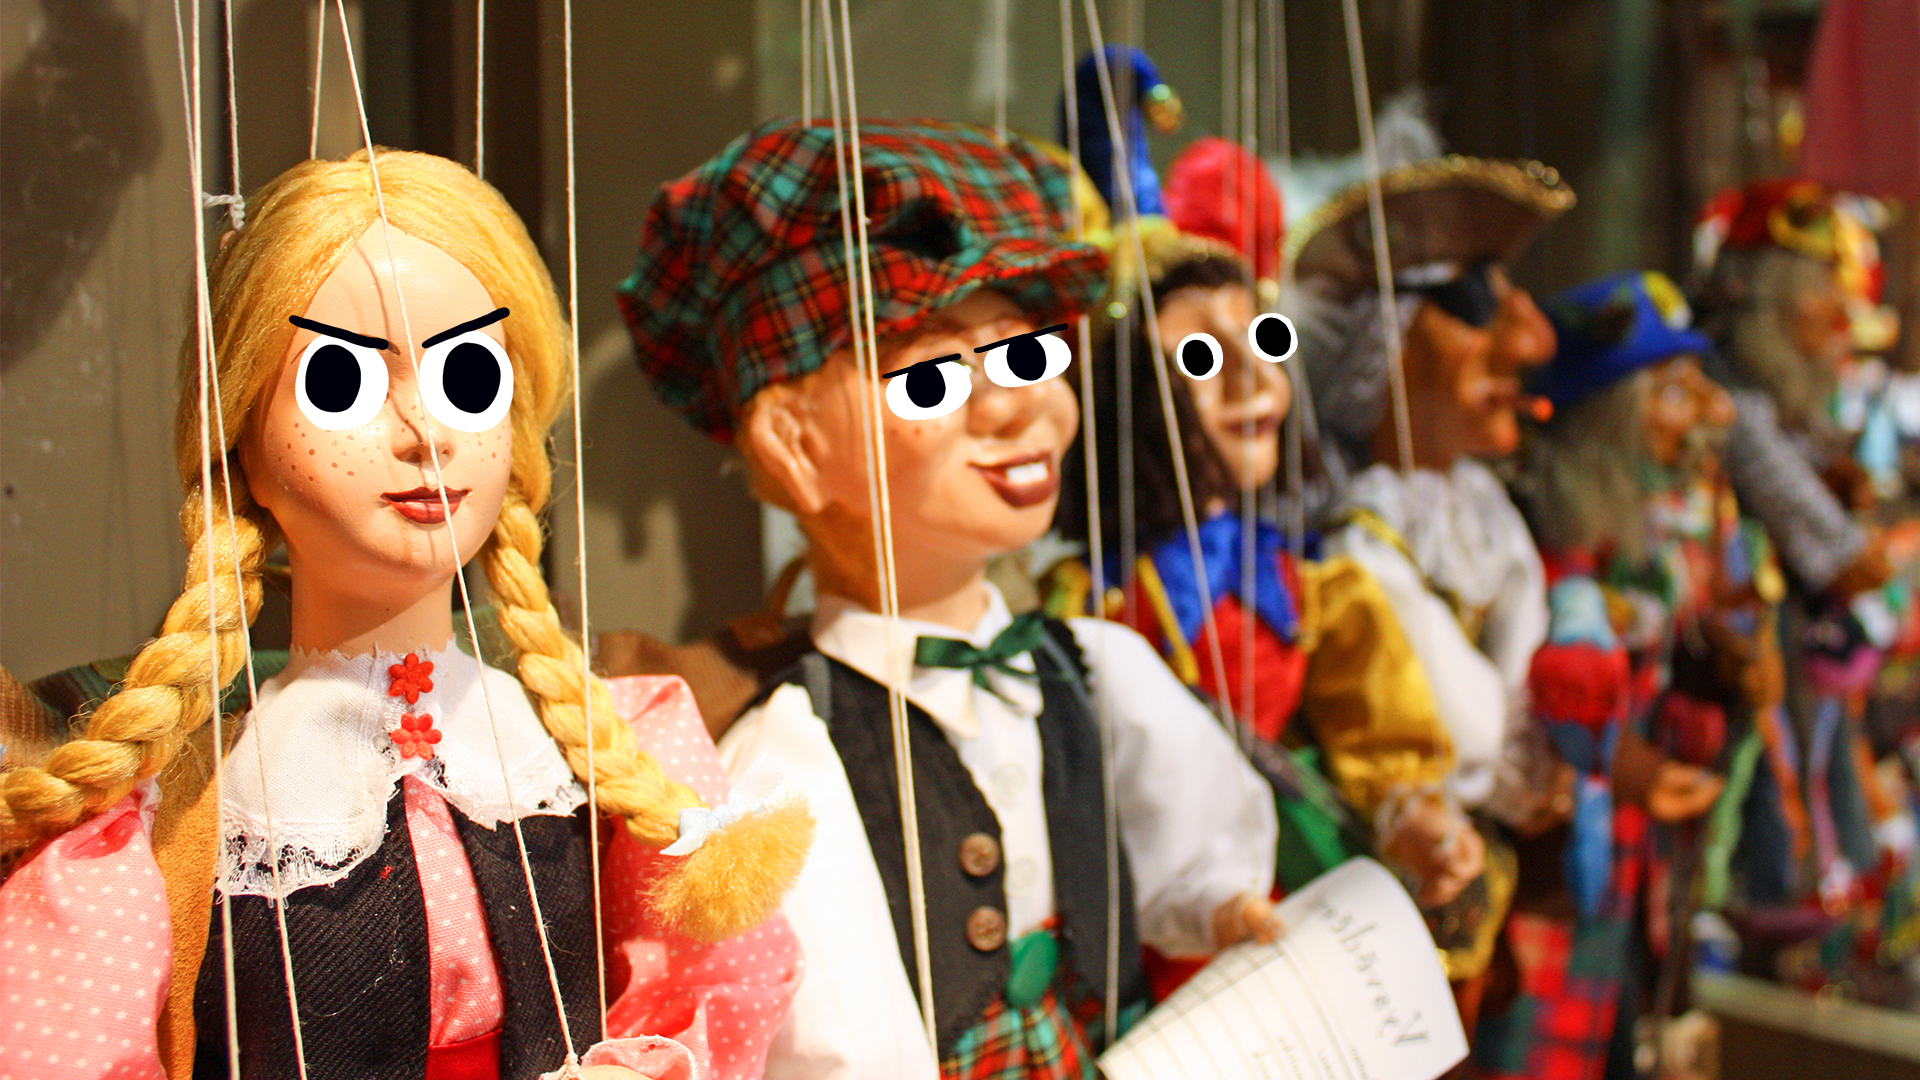 A row of sinister traditional puppets